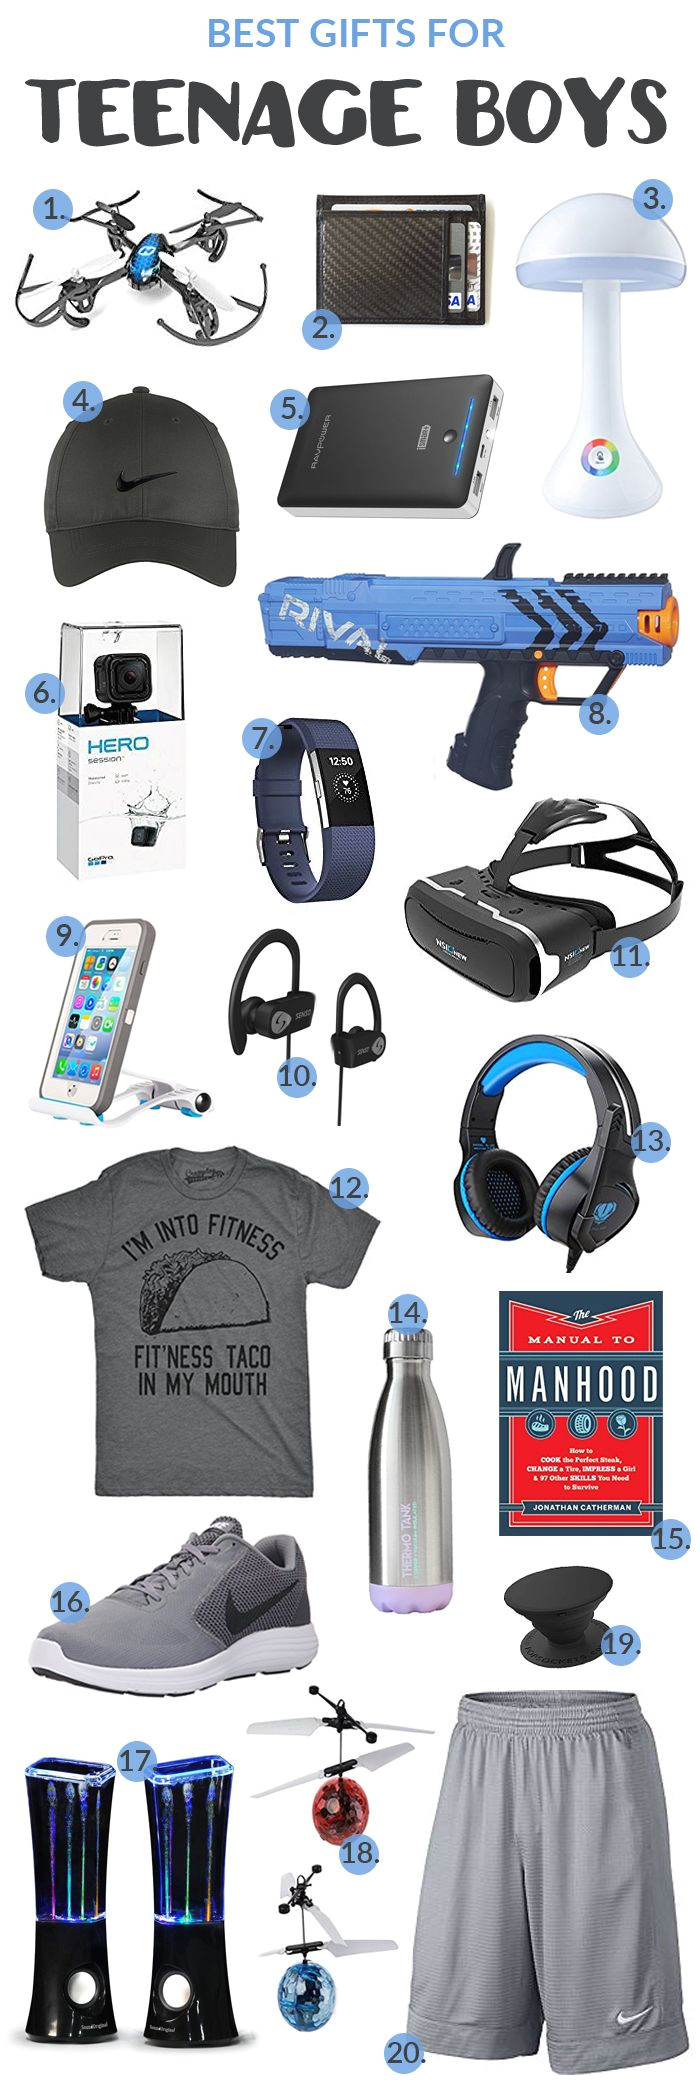 teenage boy gift guide need ideas for what to get a teenage boy for a gift for christmas his birthday or any other occasion the best gift idea for him